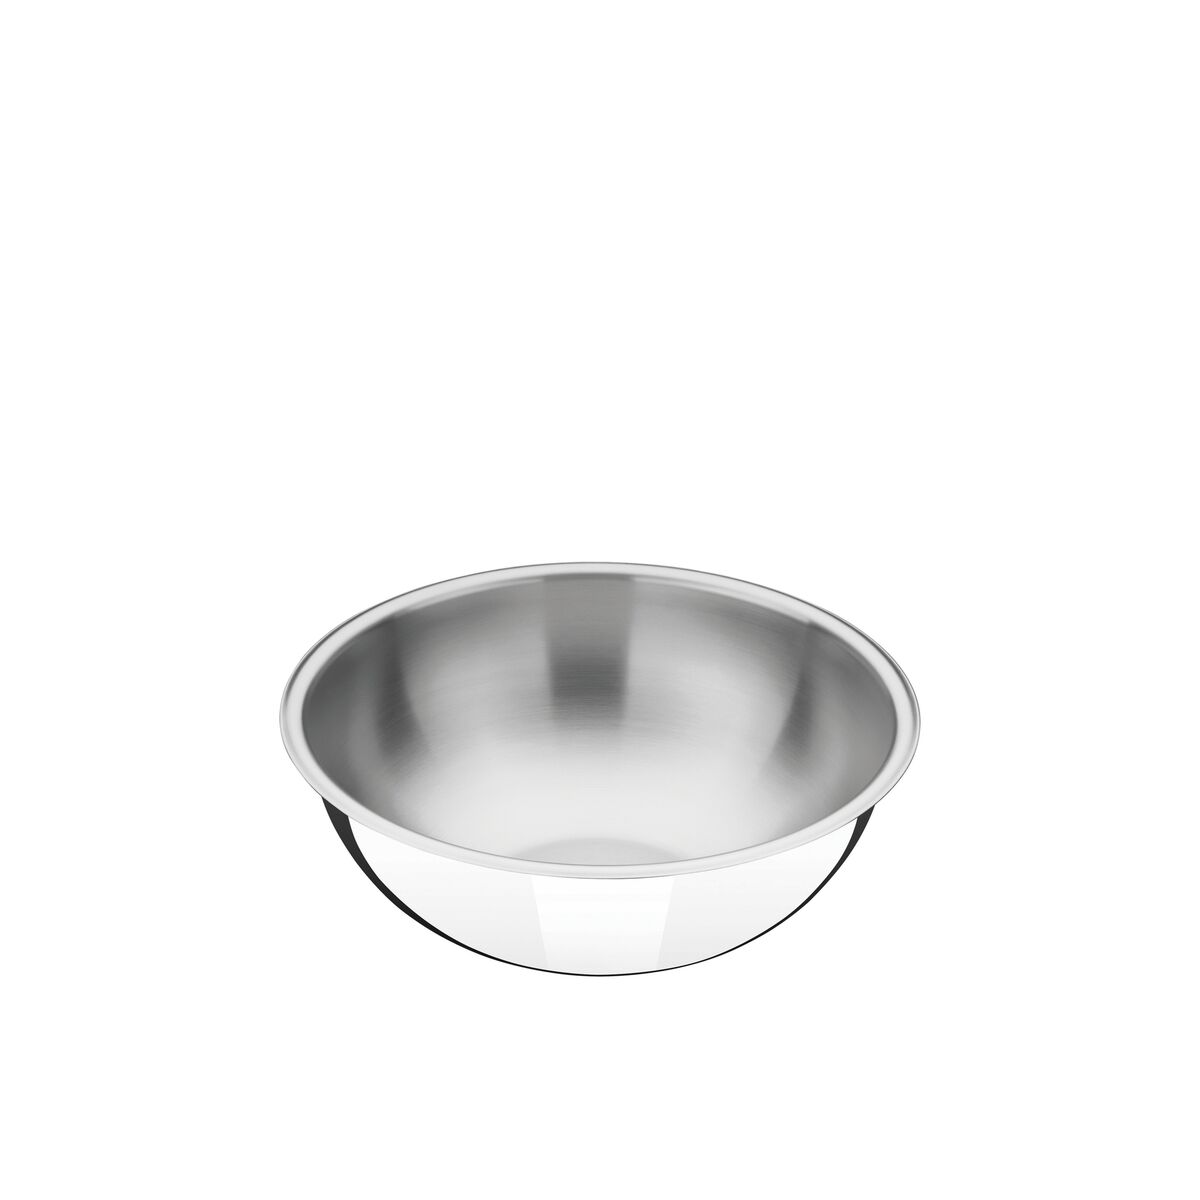 Tramontina Cucina stainless steel bowl, 24 cm and 2,8 L